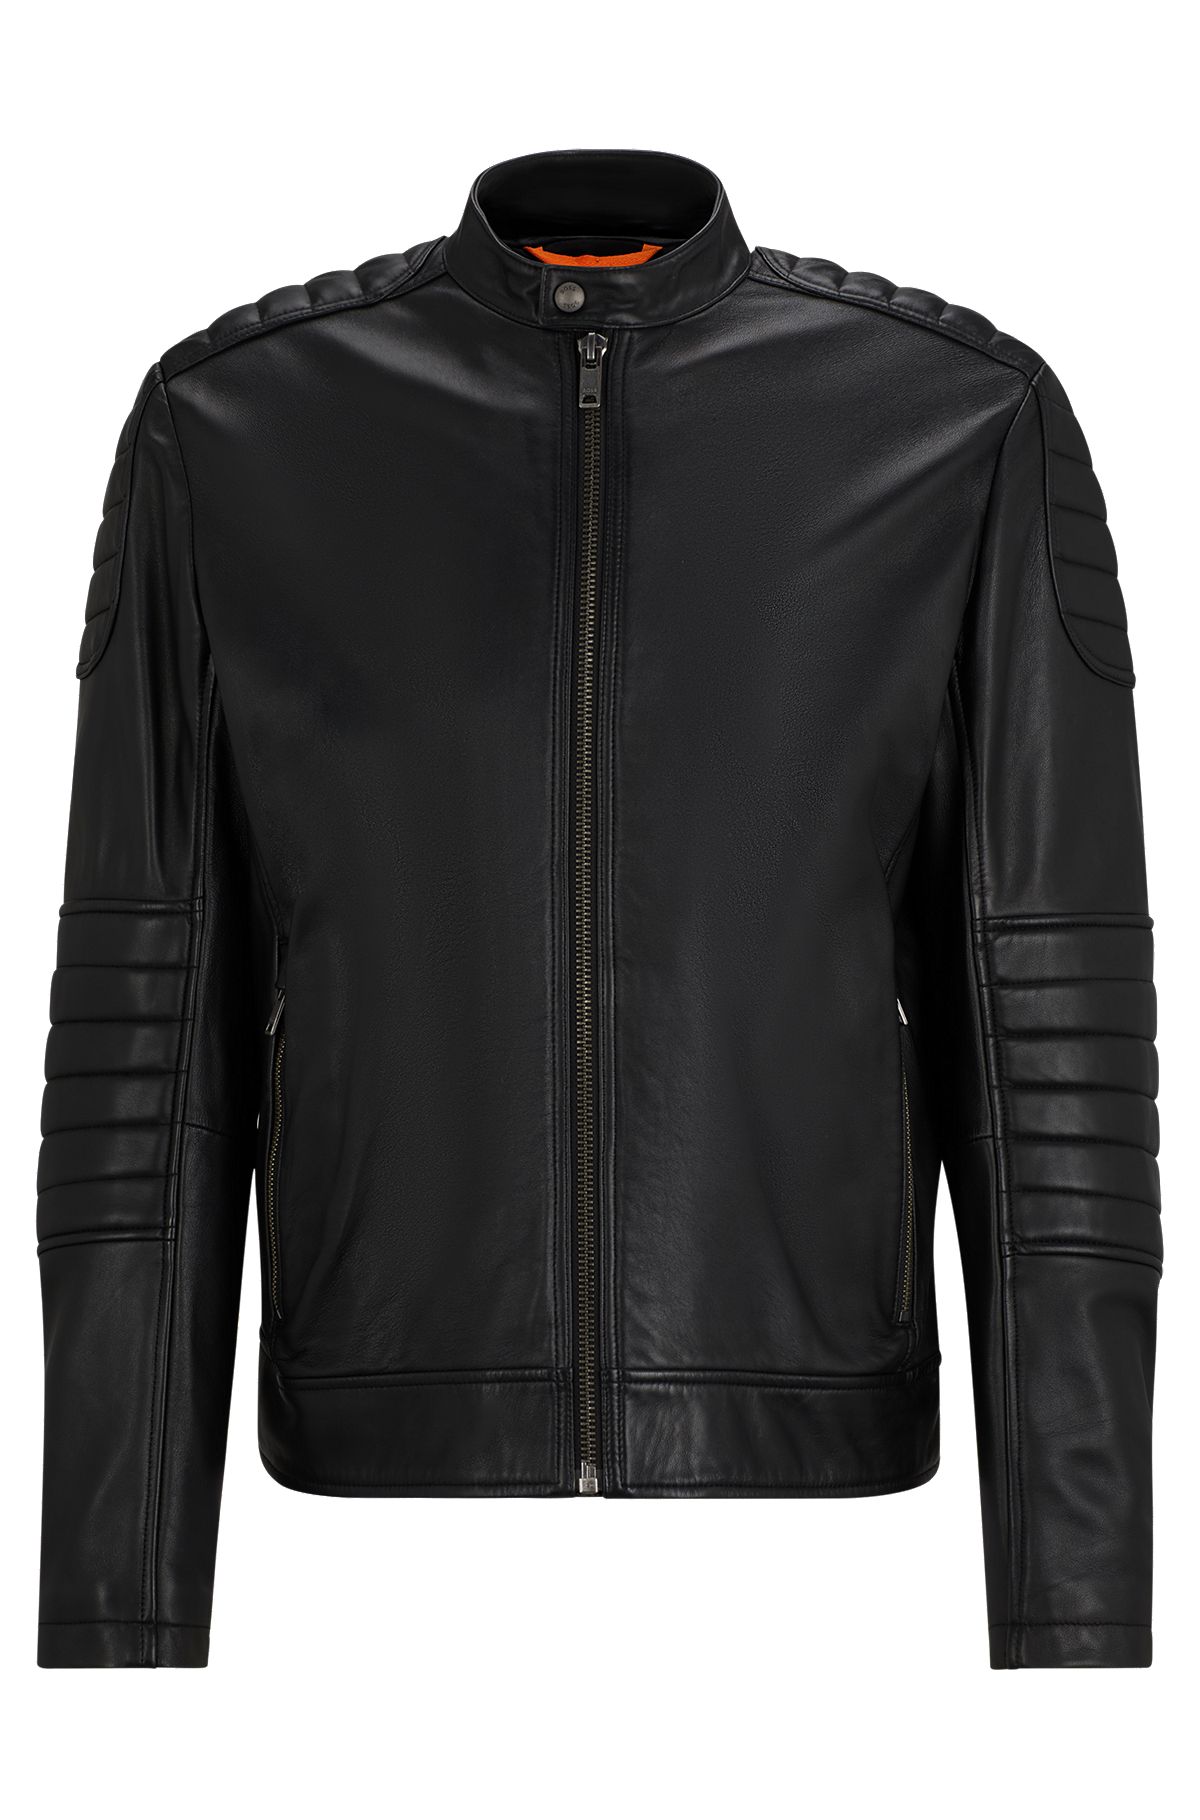 Regular-fit jacket in lamb leather with quilting detail, Black